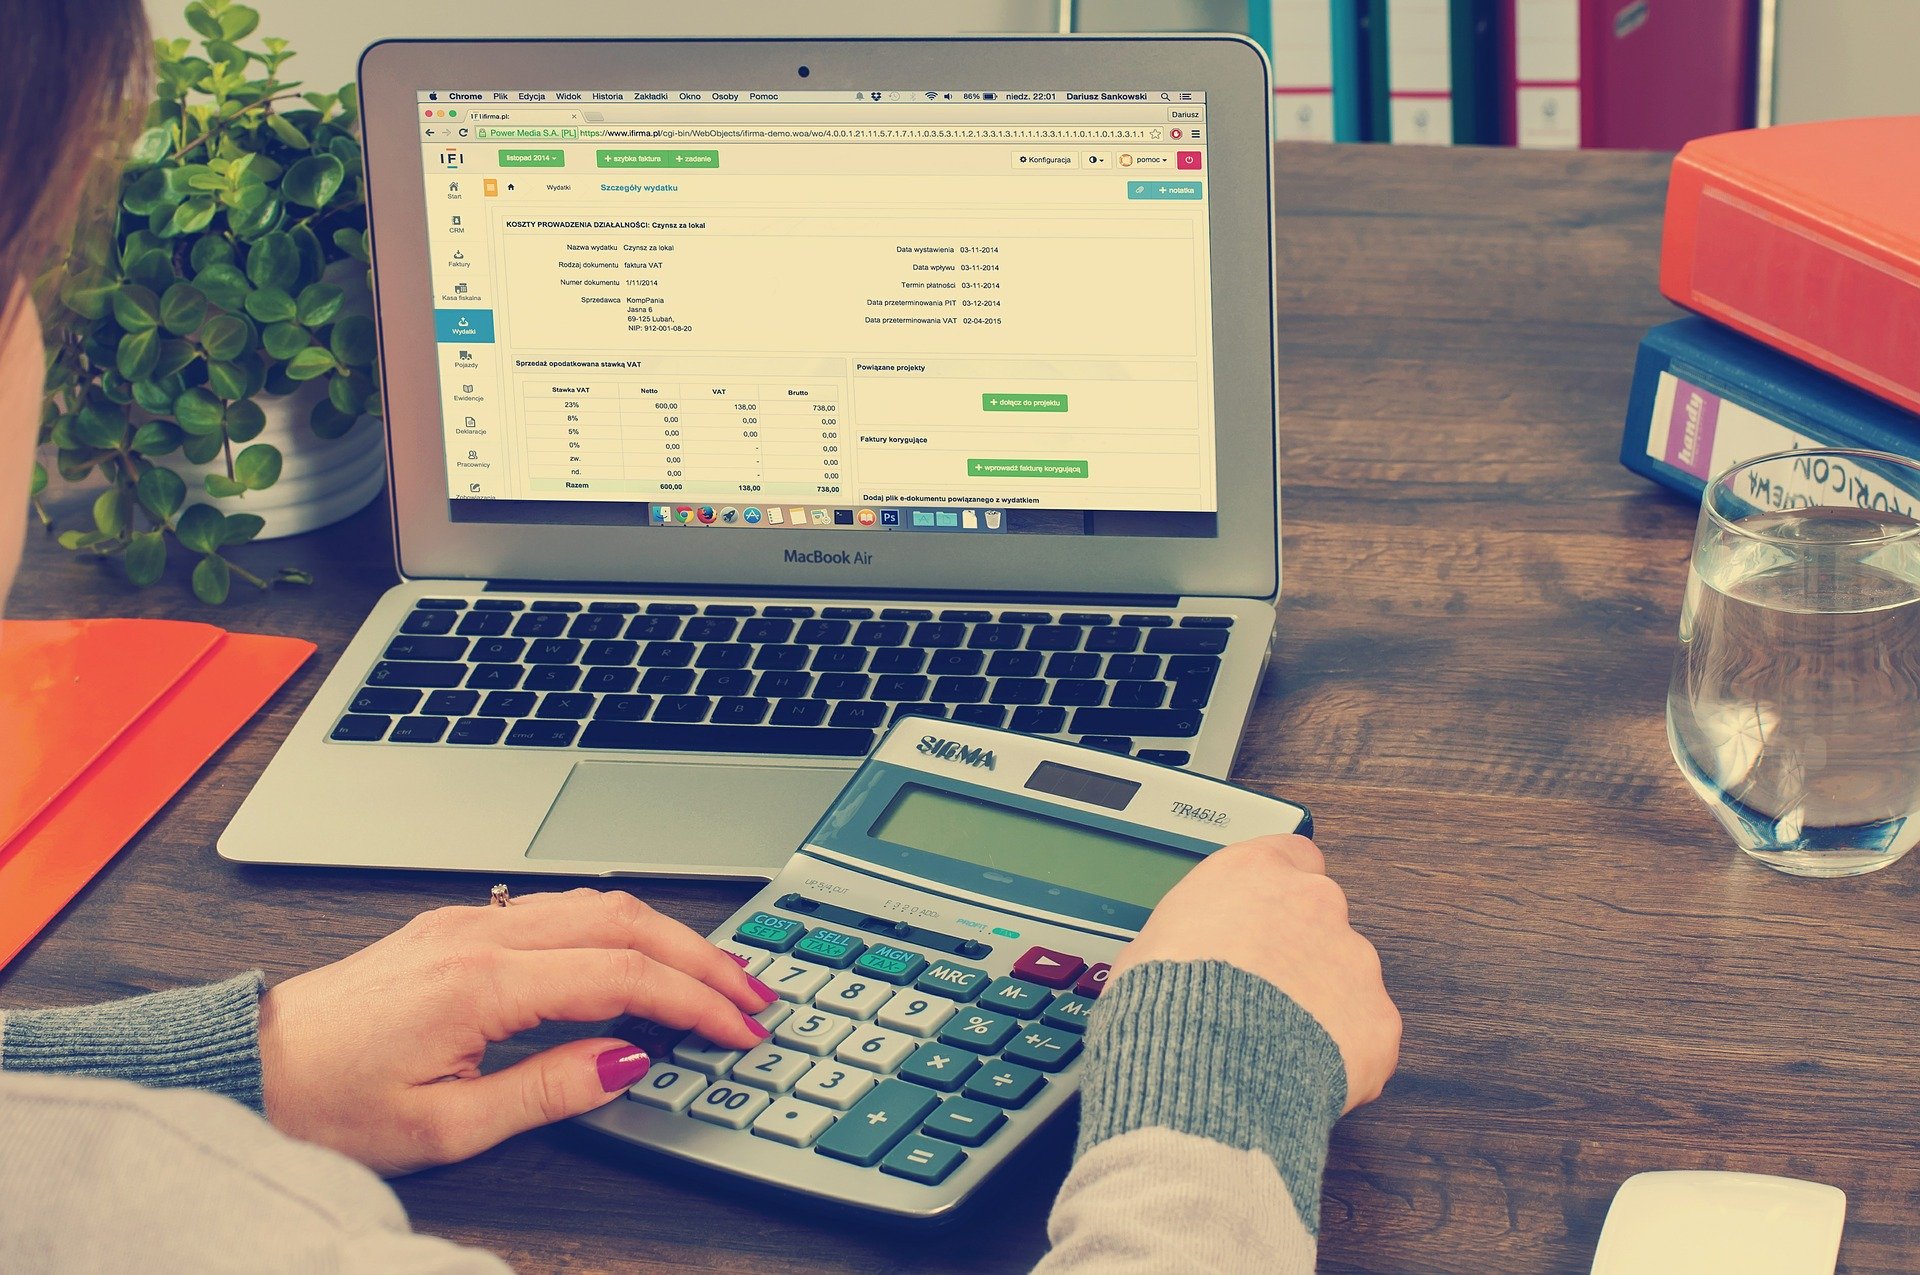 Person bookkeeping on laptop and using calculator Image by William Iven from Pixabay 